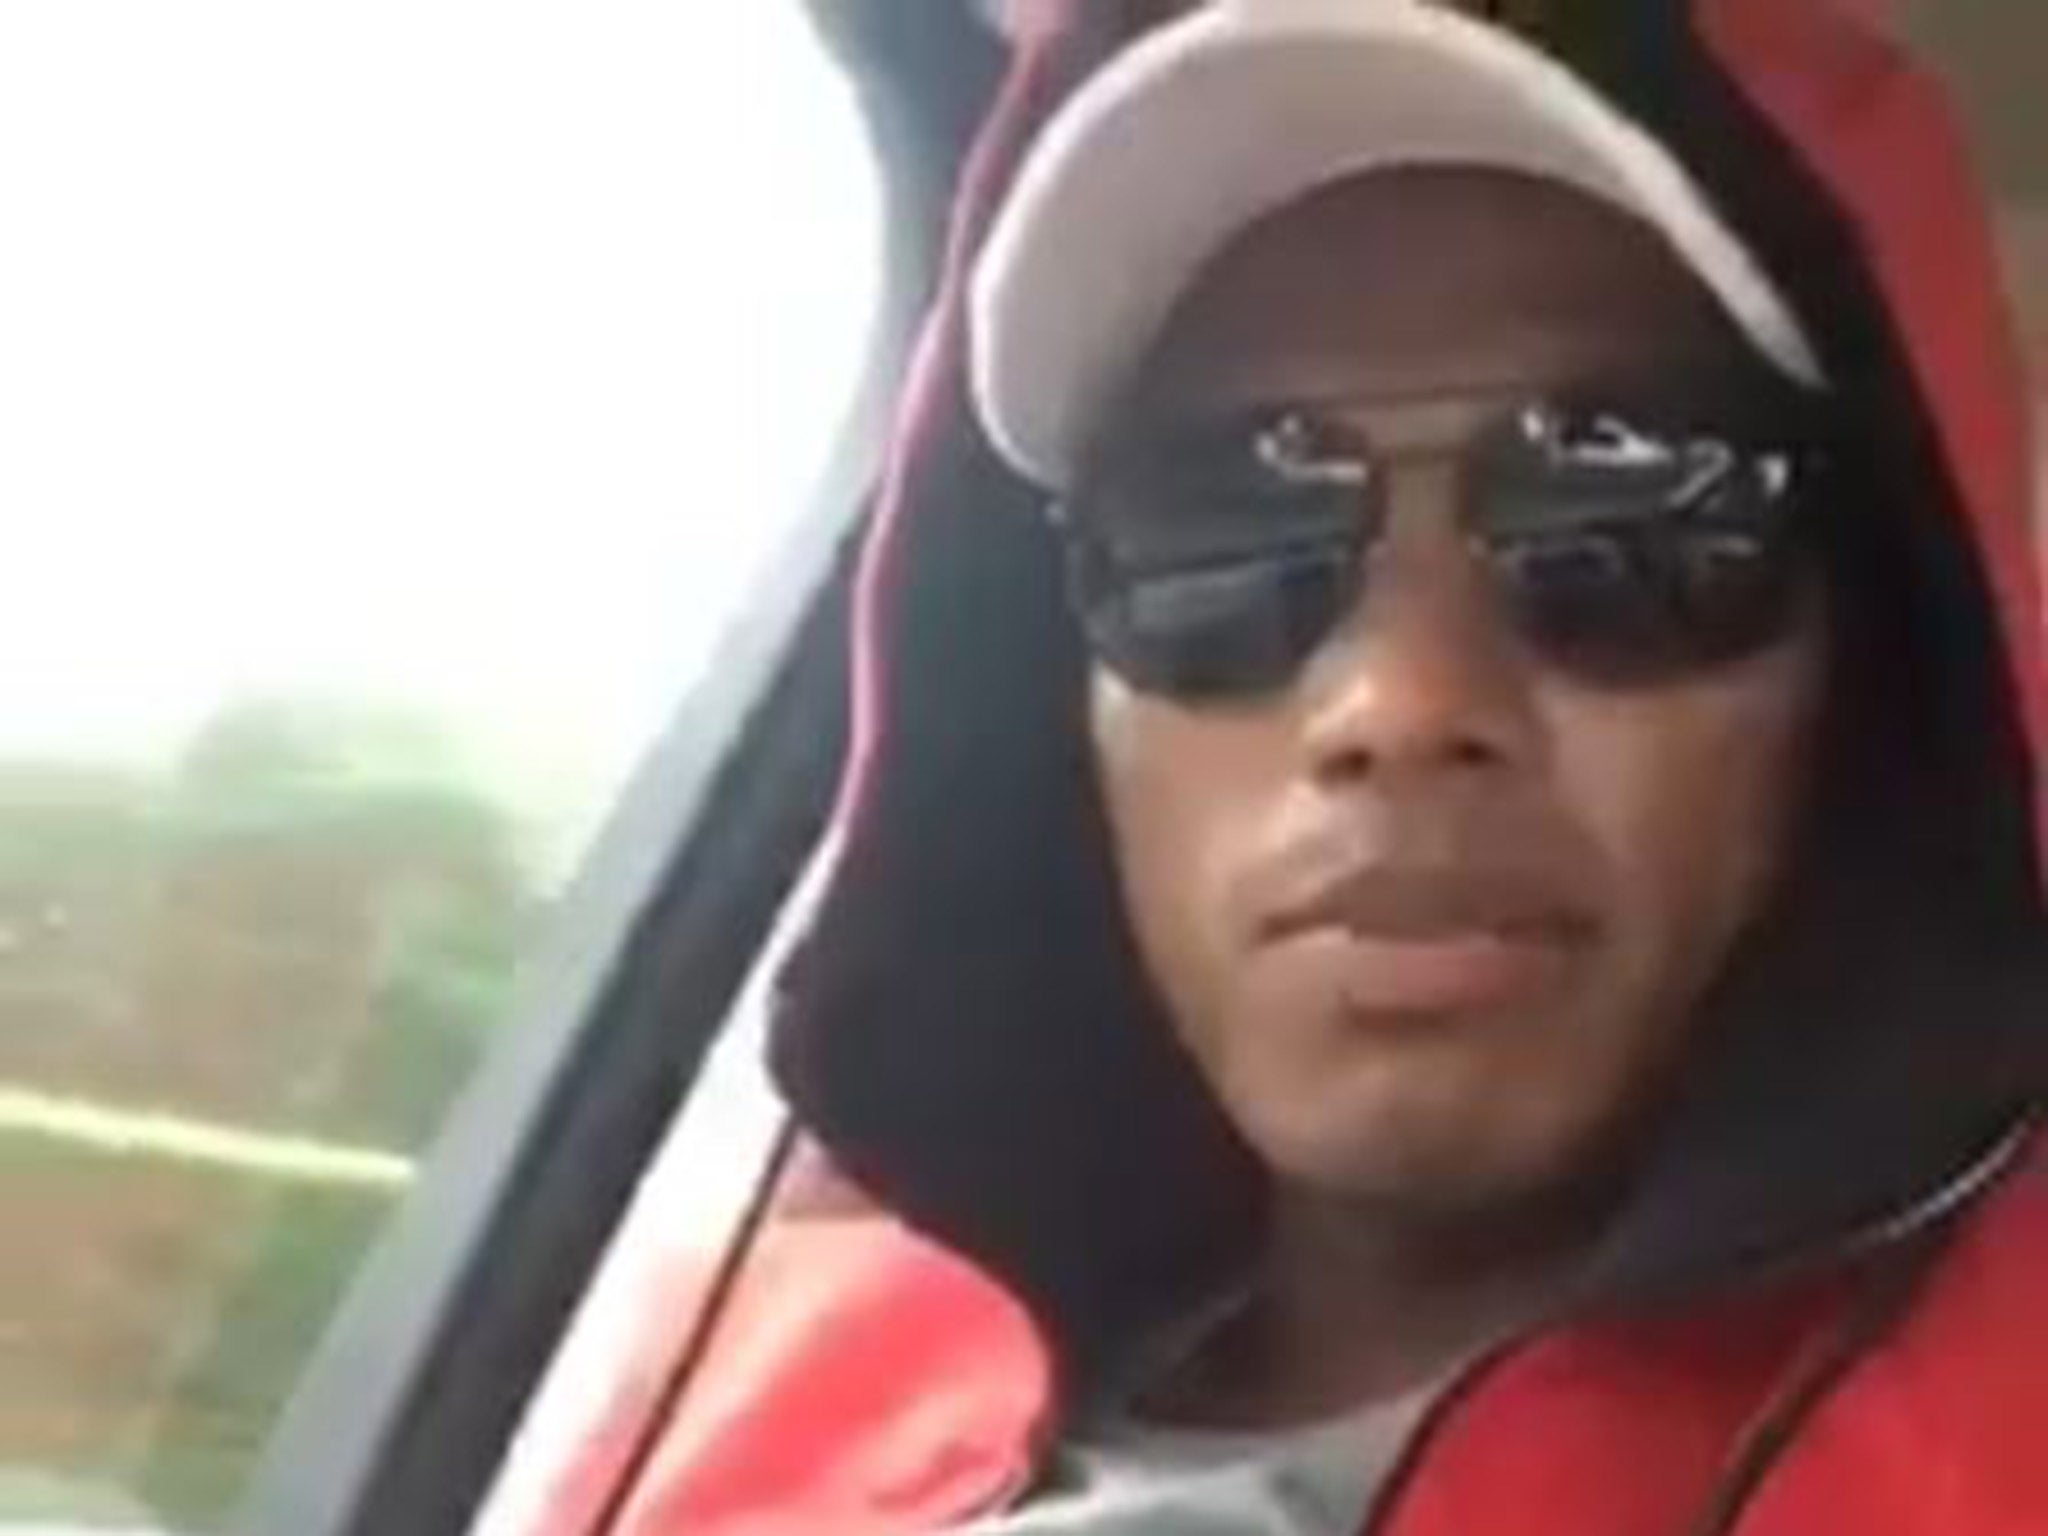 Antonio Valencia posted a video to update Manchester United fans on his condition